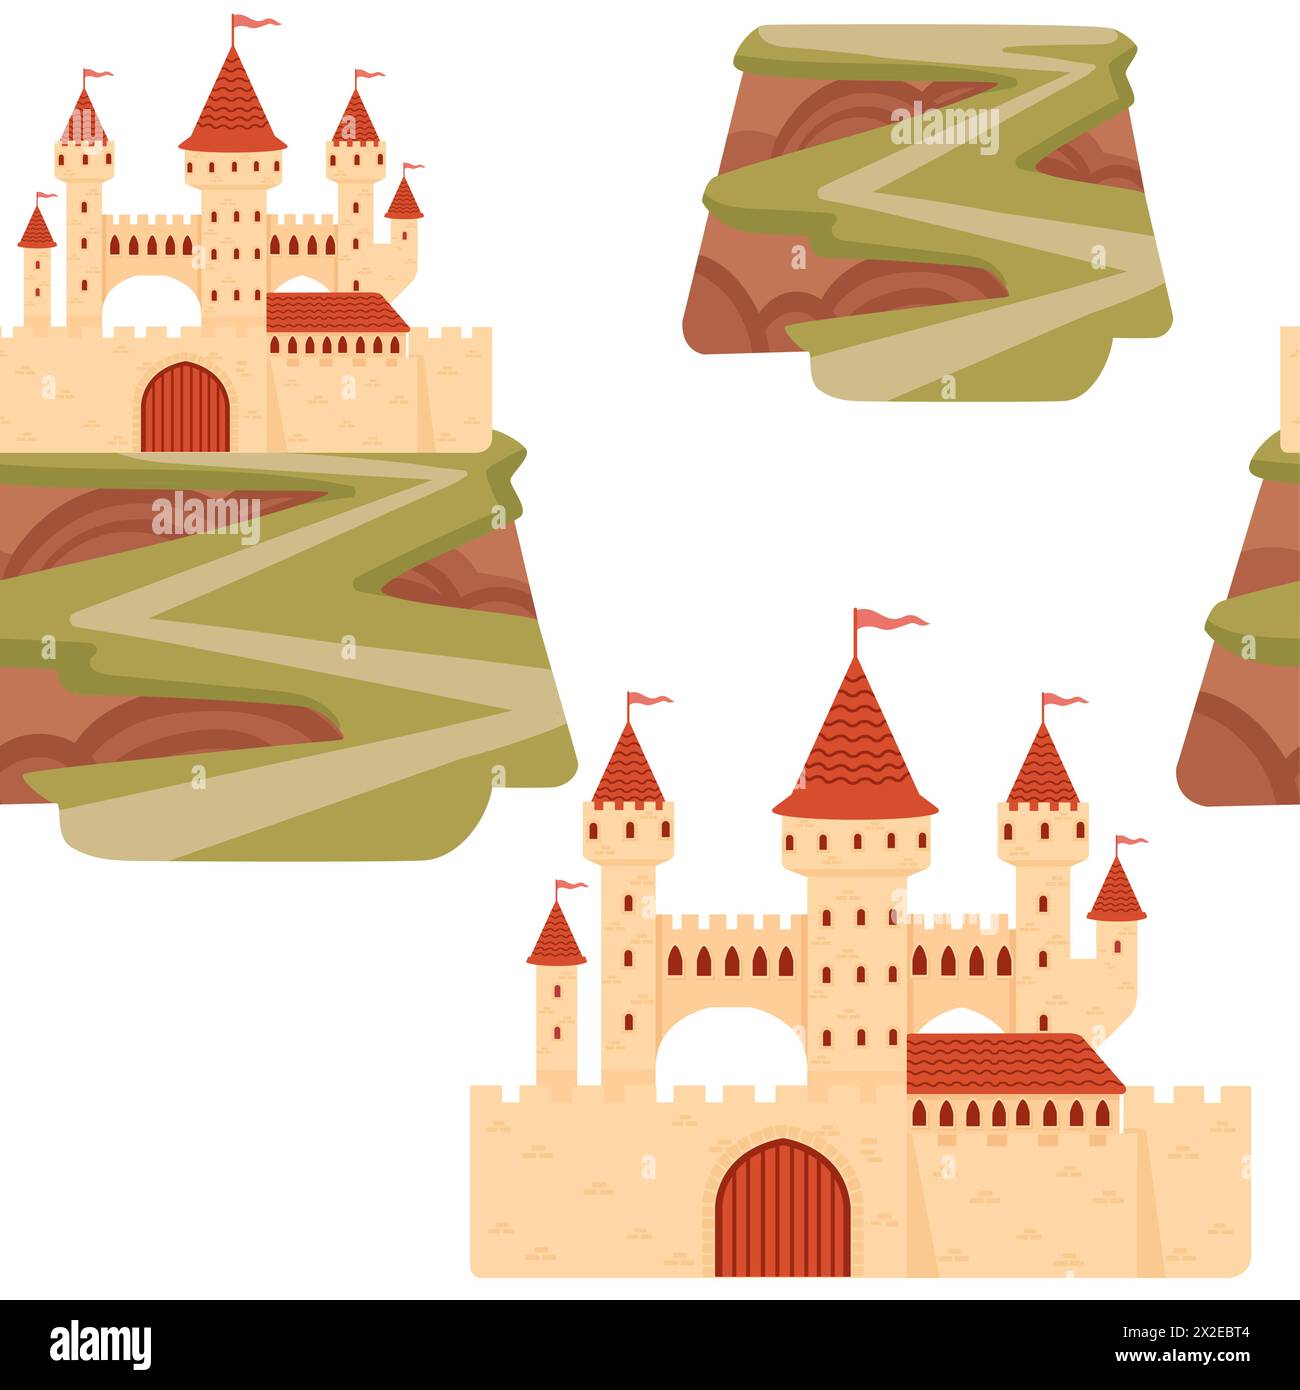 Seamless pattern of fantasy medieval stone castle with towers gate standing on a high mountain vector illustration on white background Stock Vector